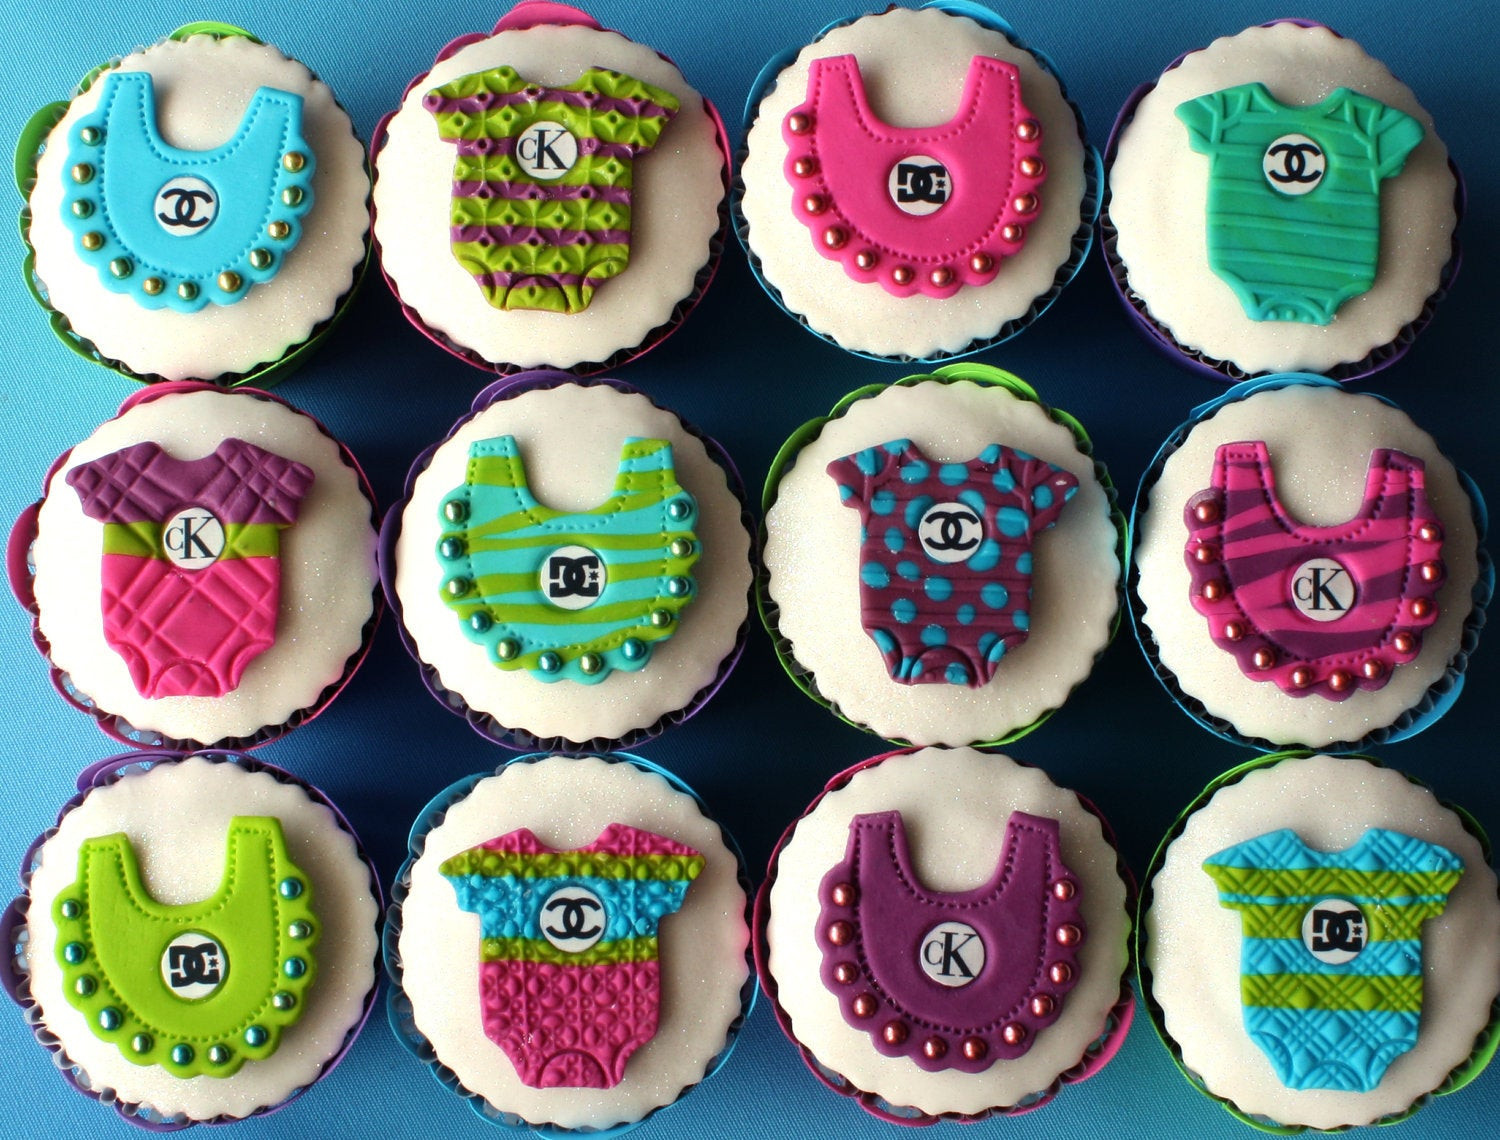 Baby Boy Cupcakes Toppers
 Cupcake Toppers Baby Boy Girl Fashion Edible Cake Decorations